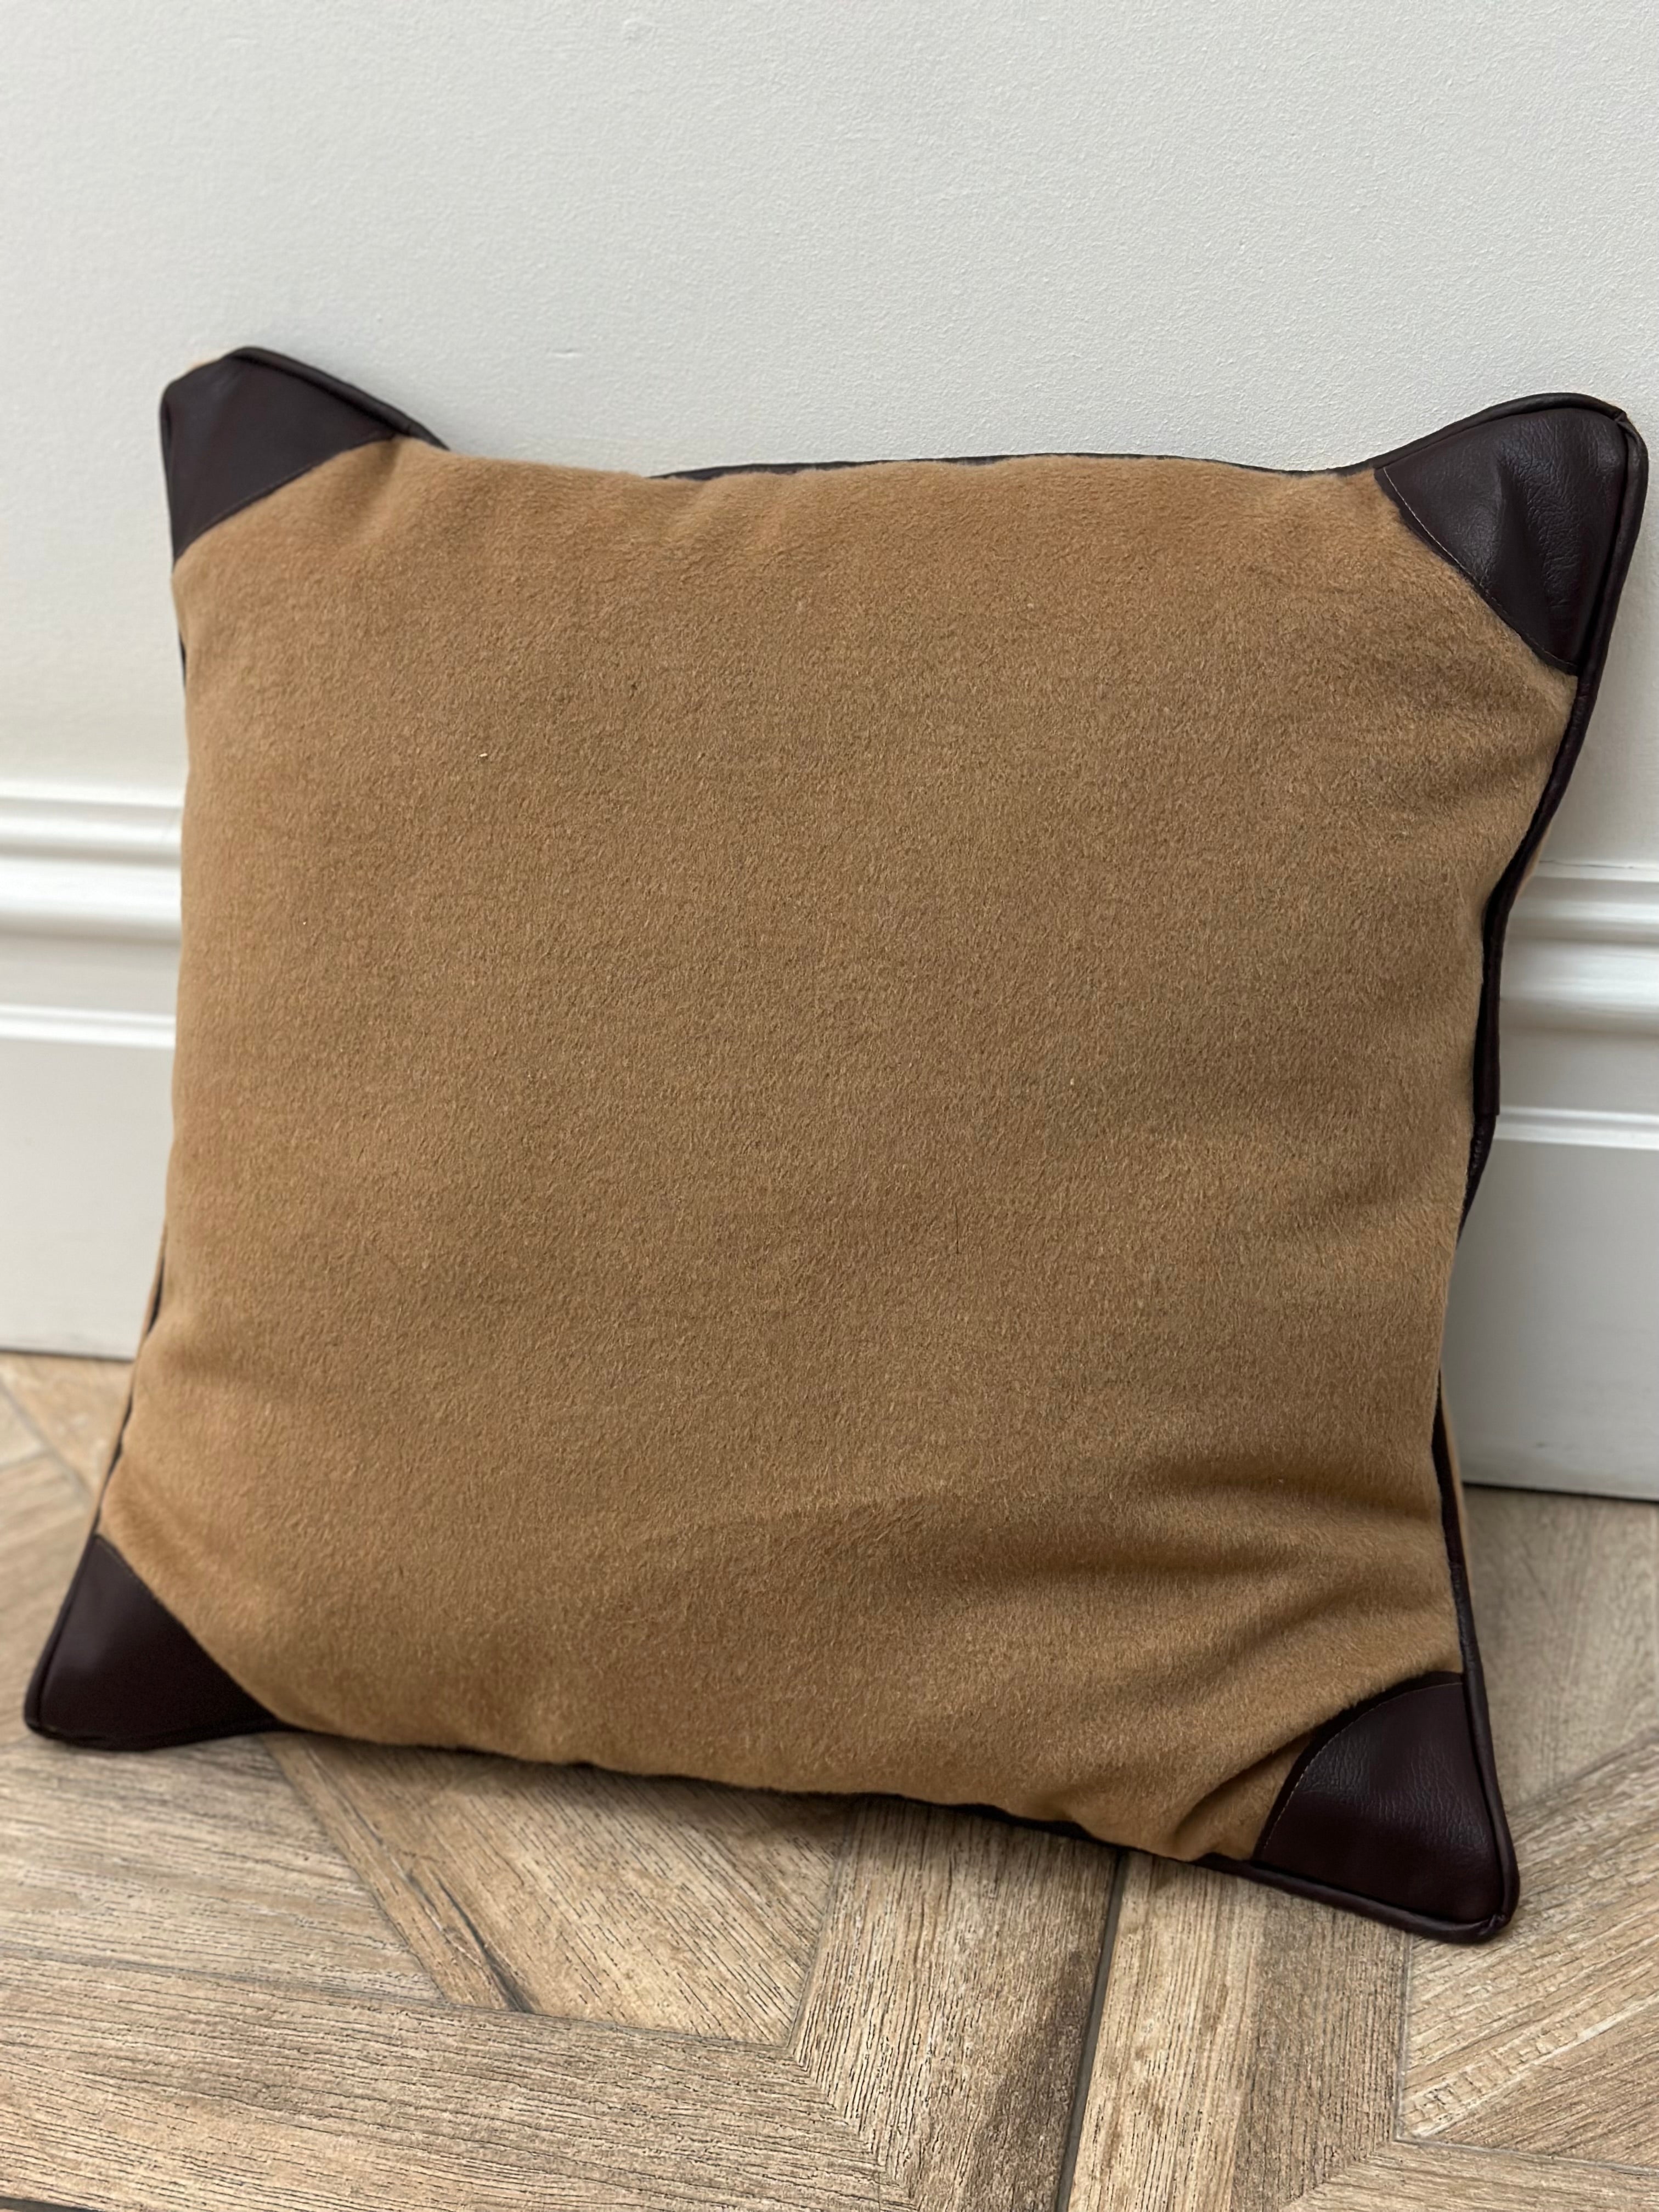 Square cushion in taupe with leather effect corners in chocolate brown